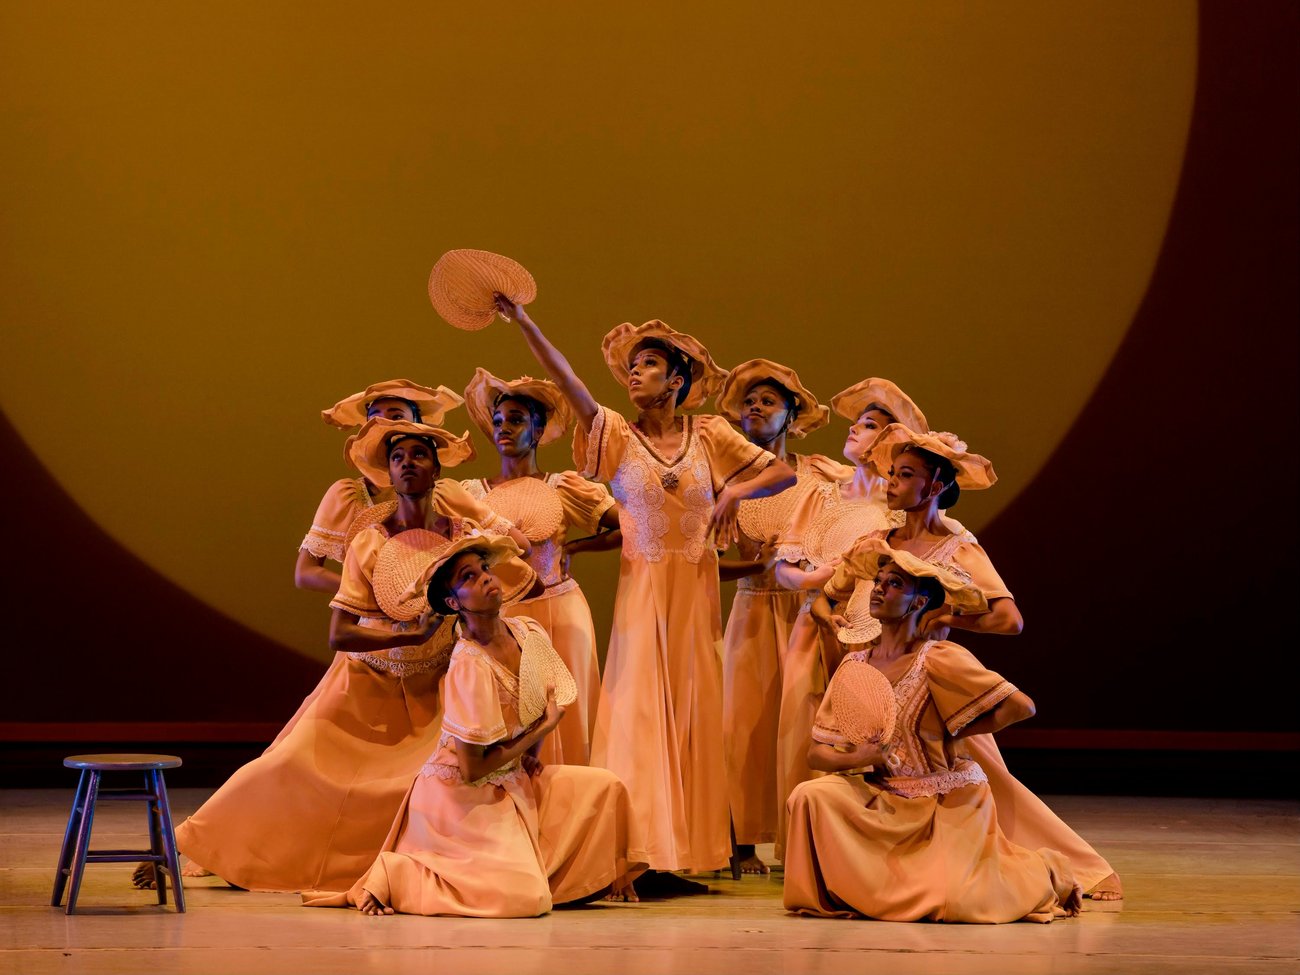 Explore Alvin Ailey and the performing arts on Google Arts & Culture